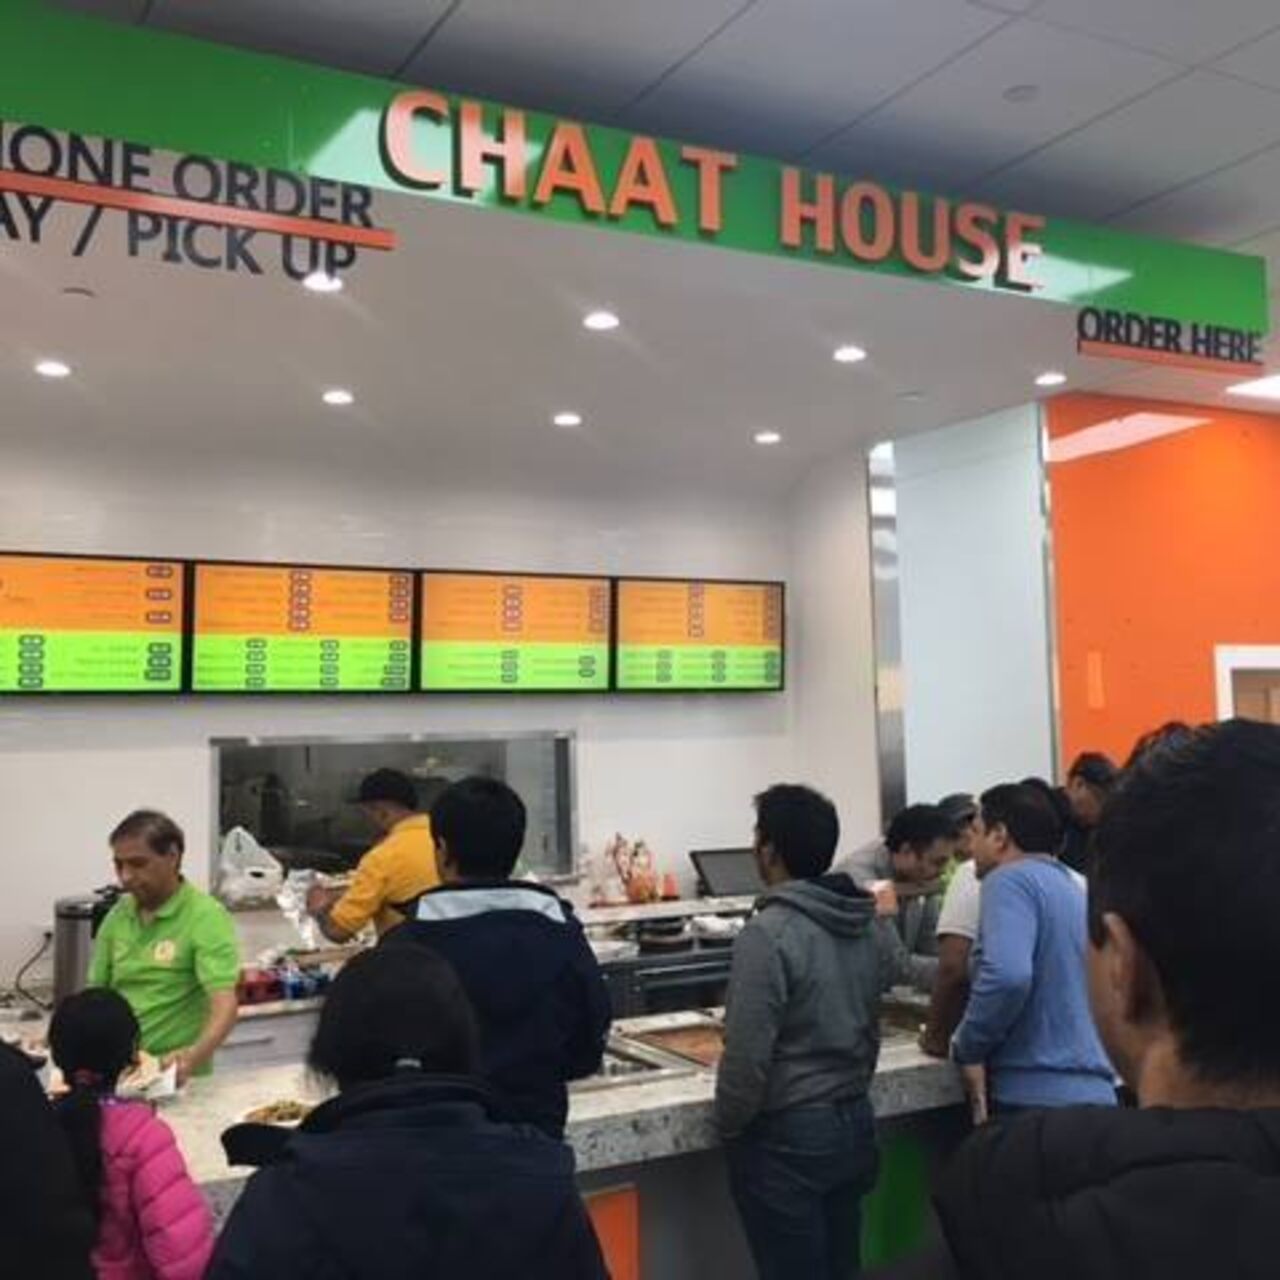 A photo of Chaat House